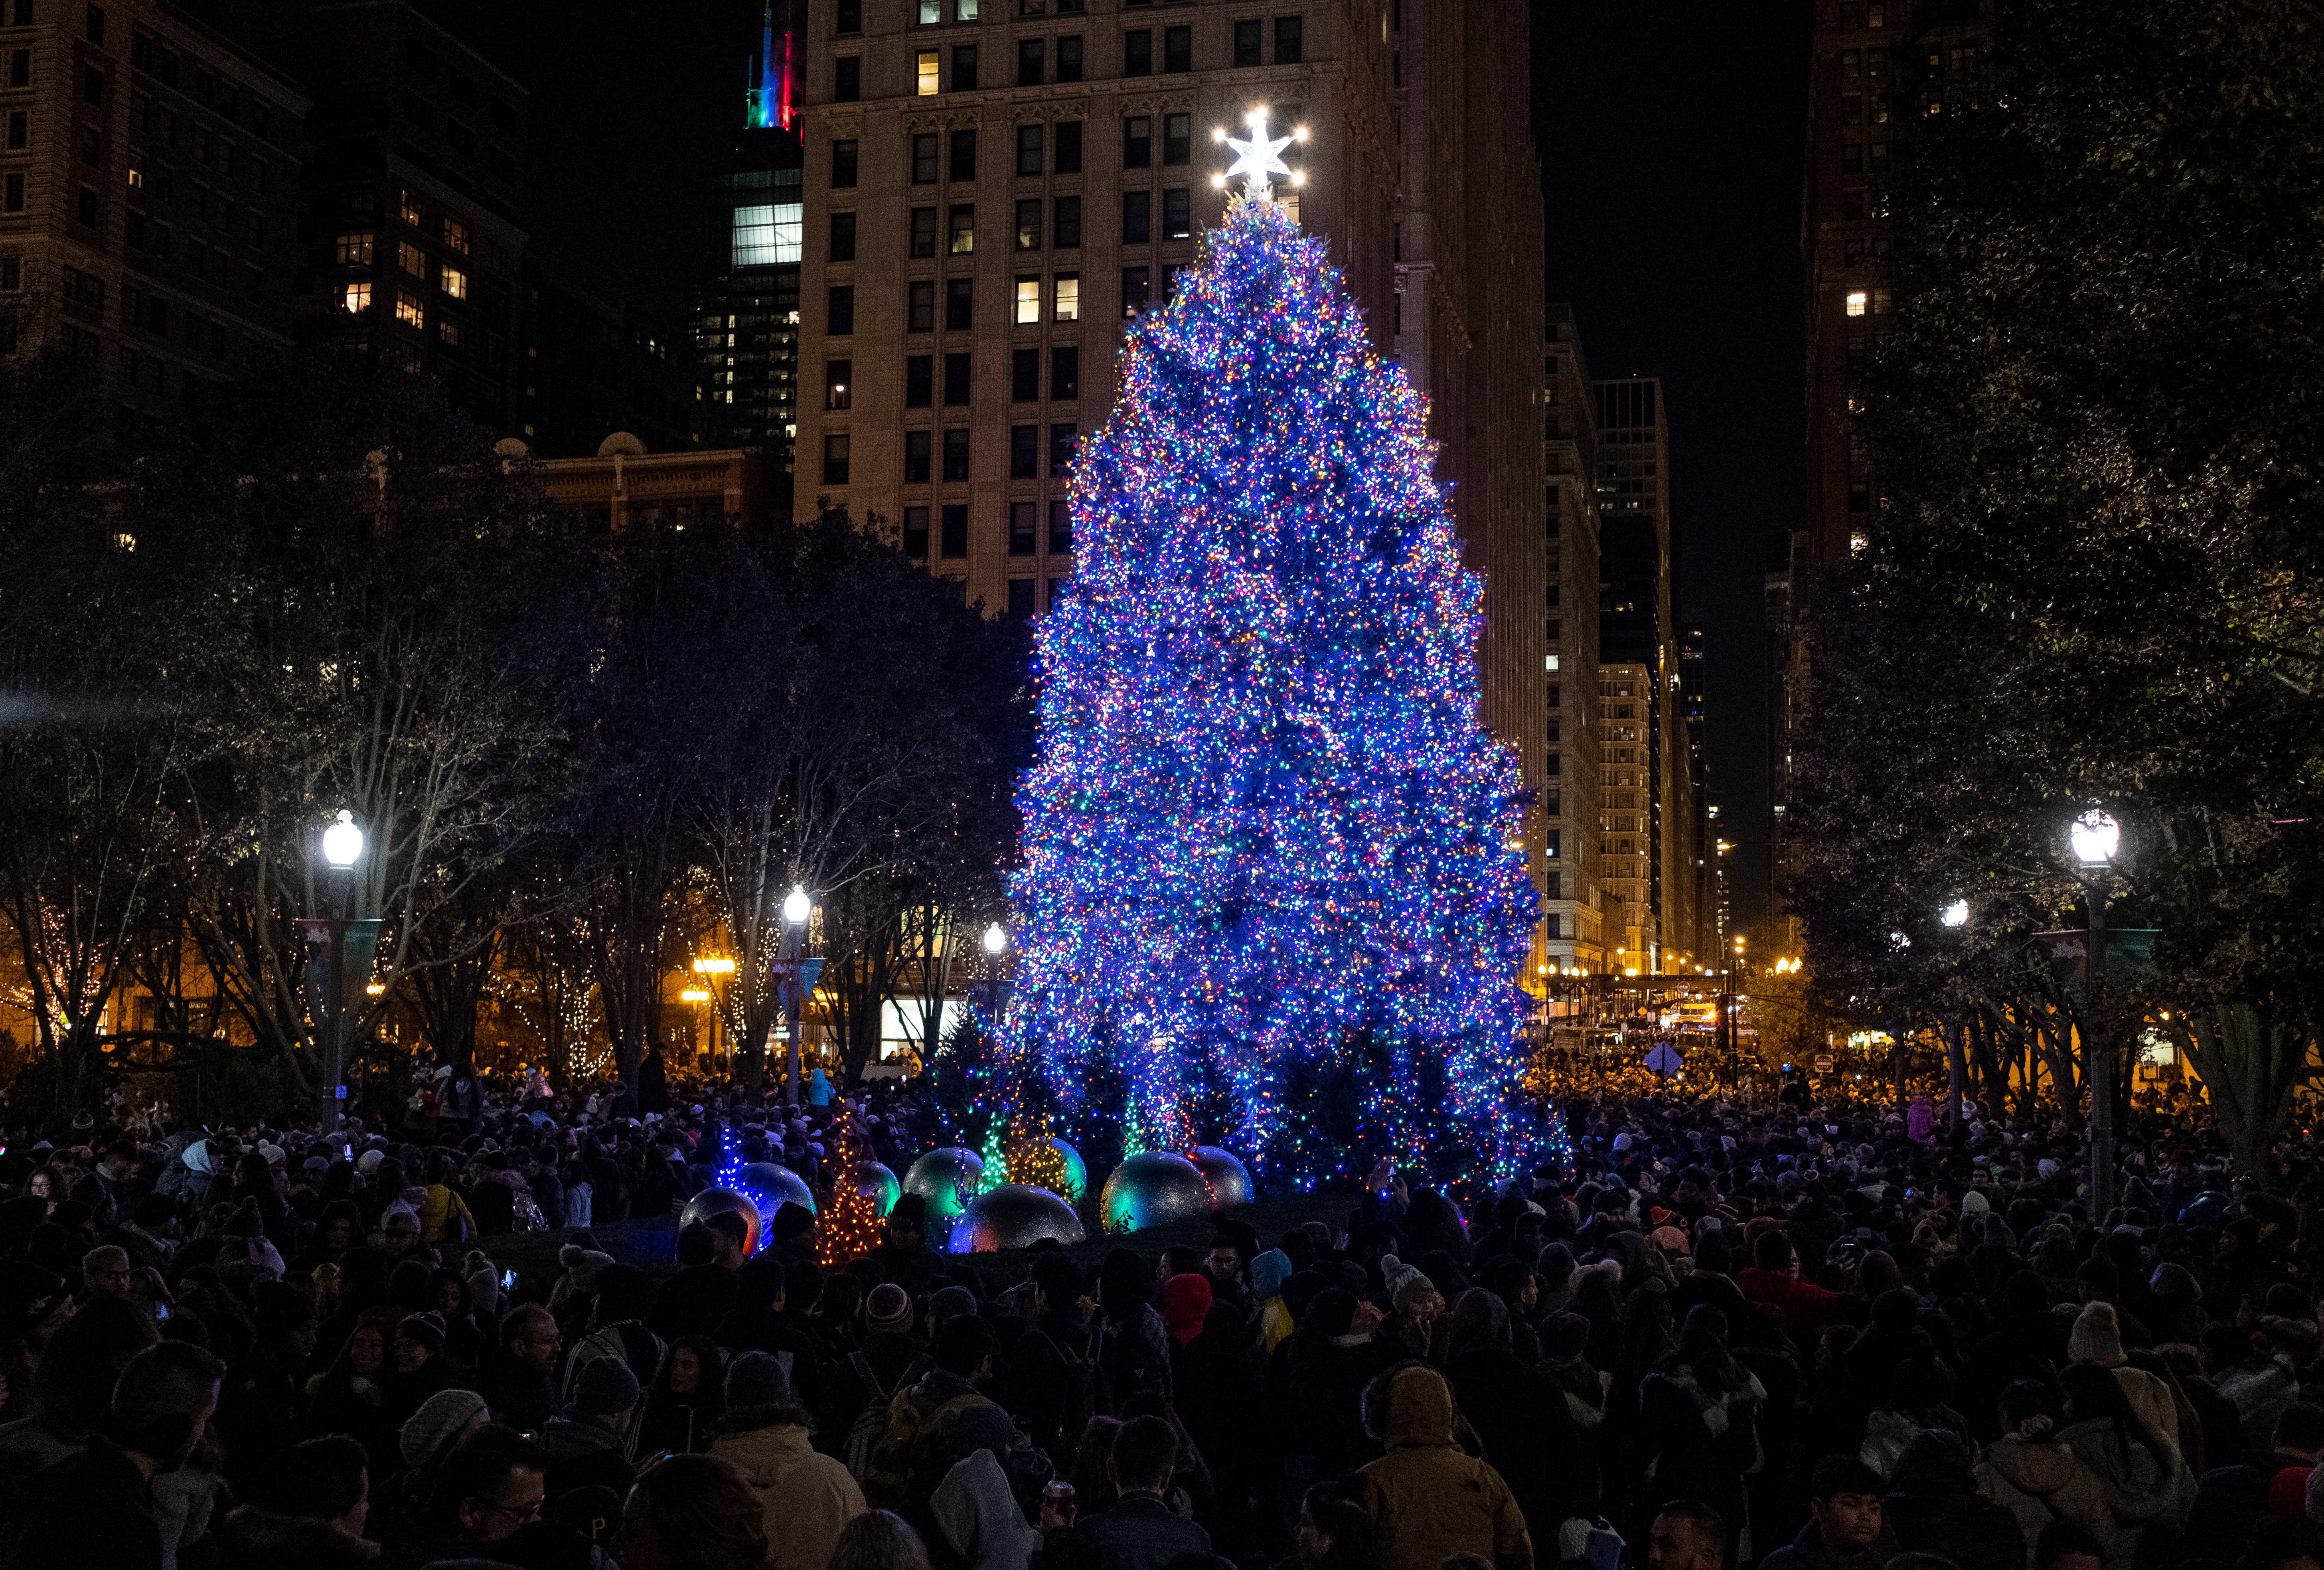 Chicago's Christmas Tree Lit Up for the Holiday Season